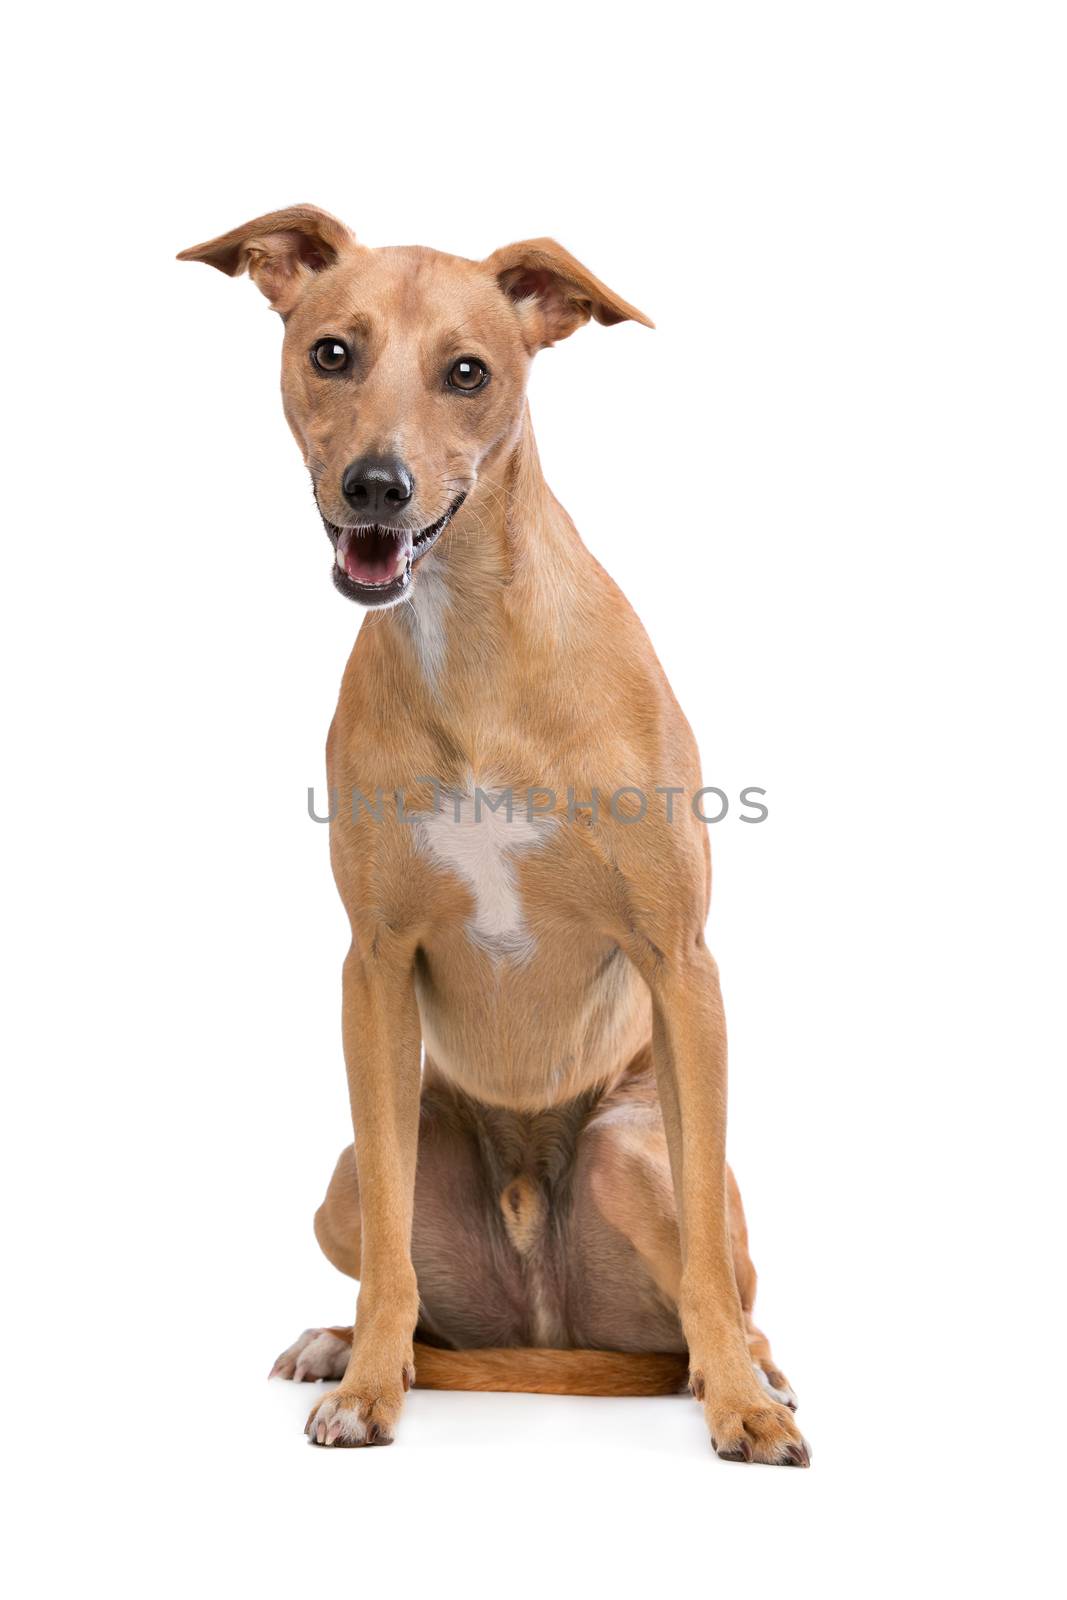 Brown Podenco Dog by eriklam